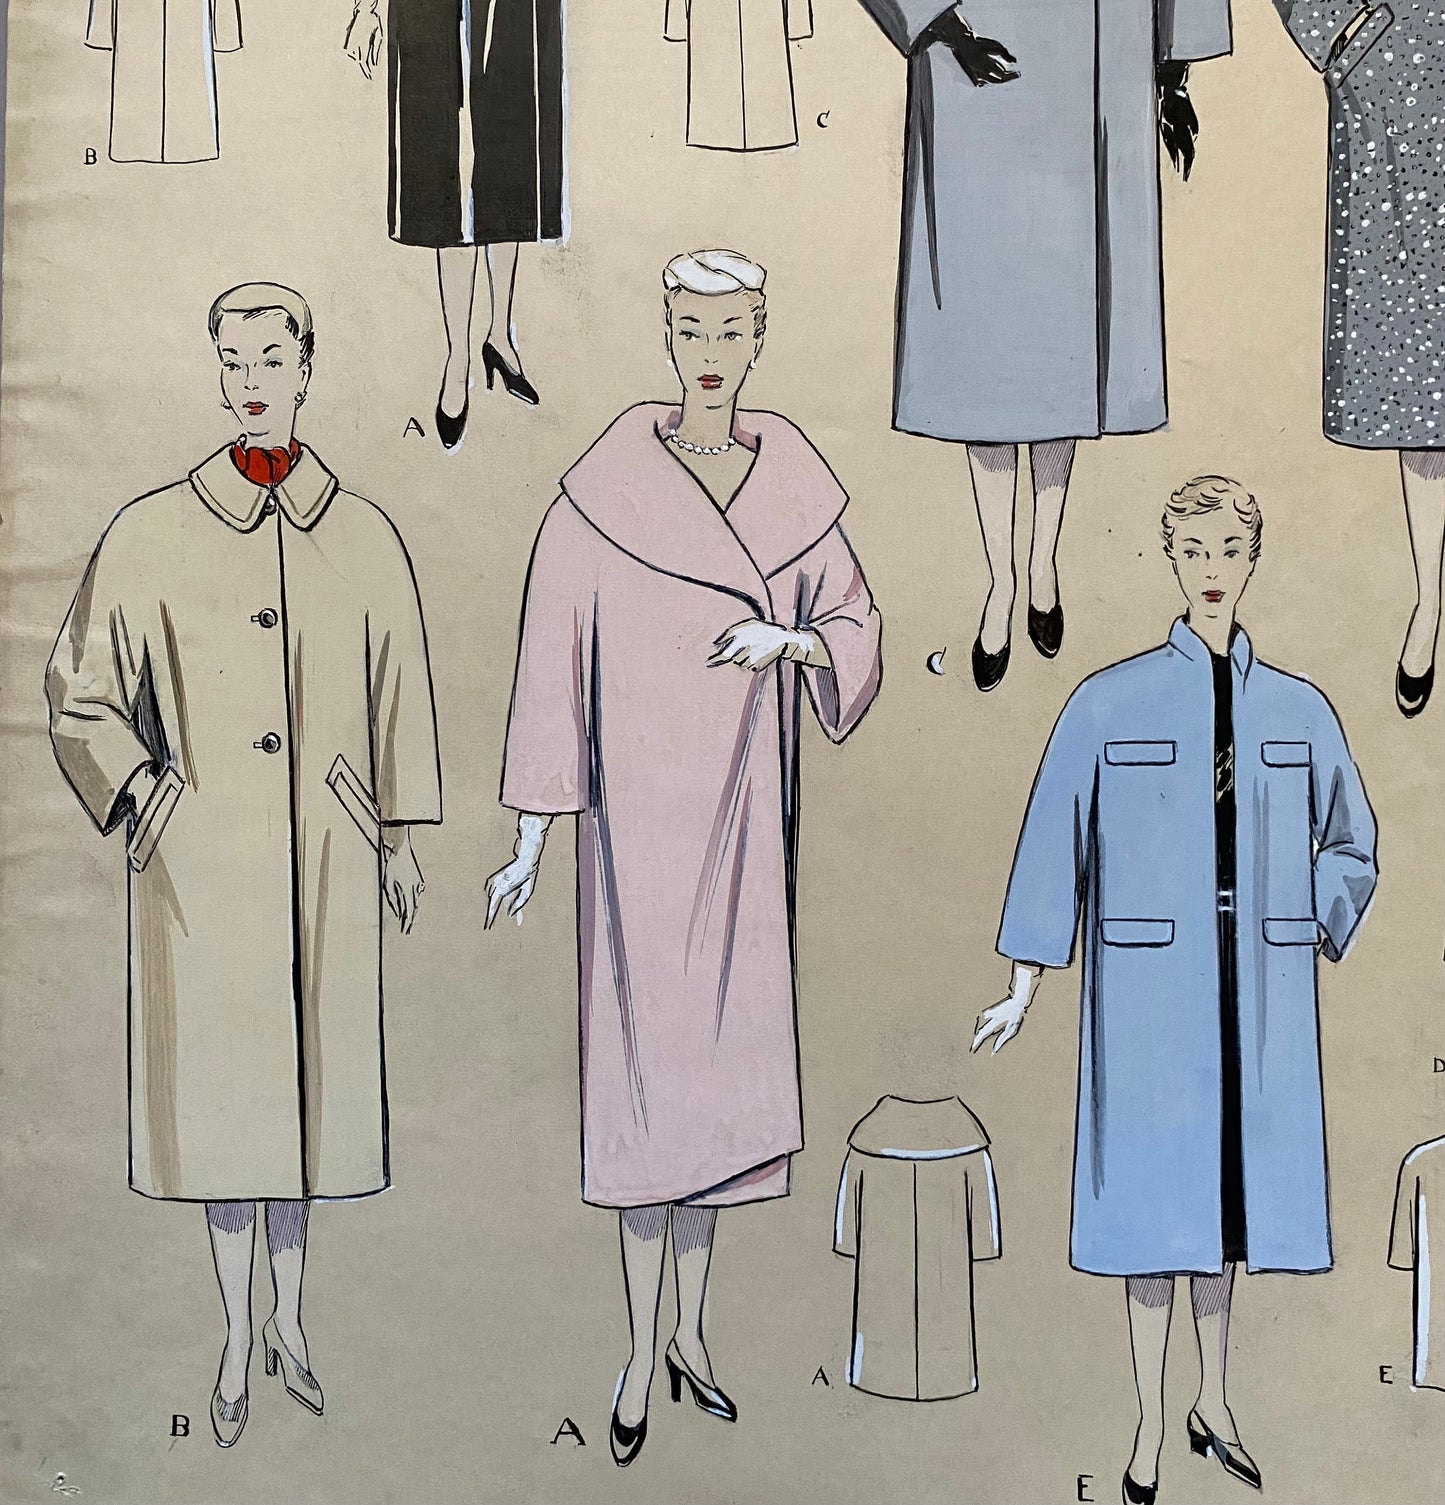 A Large Hand Drawn and Hand Painted Fashion Illustration. Featuring Coats. From Barcelona, Spain. 1954 -1955. Size: 50. 5 x 40.5 cms.